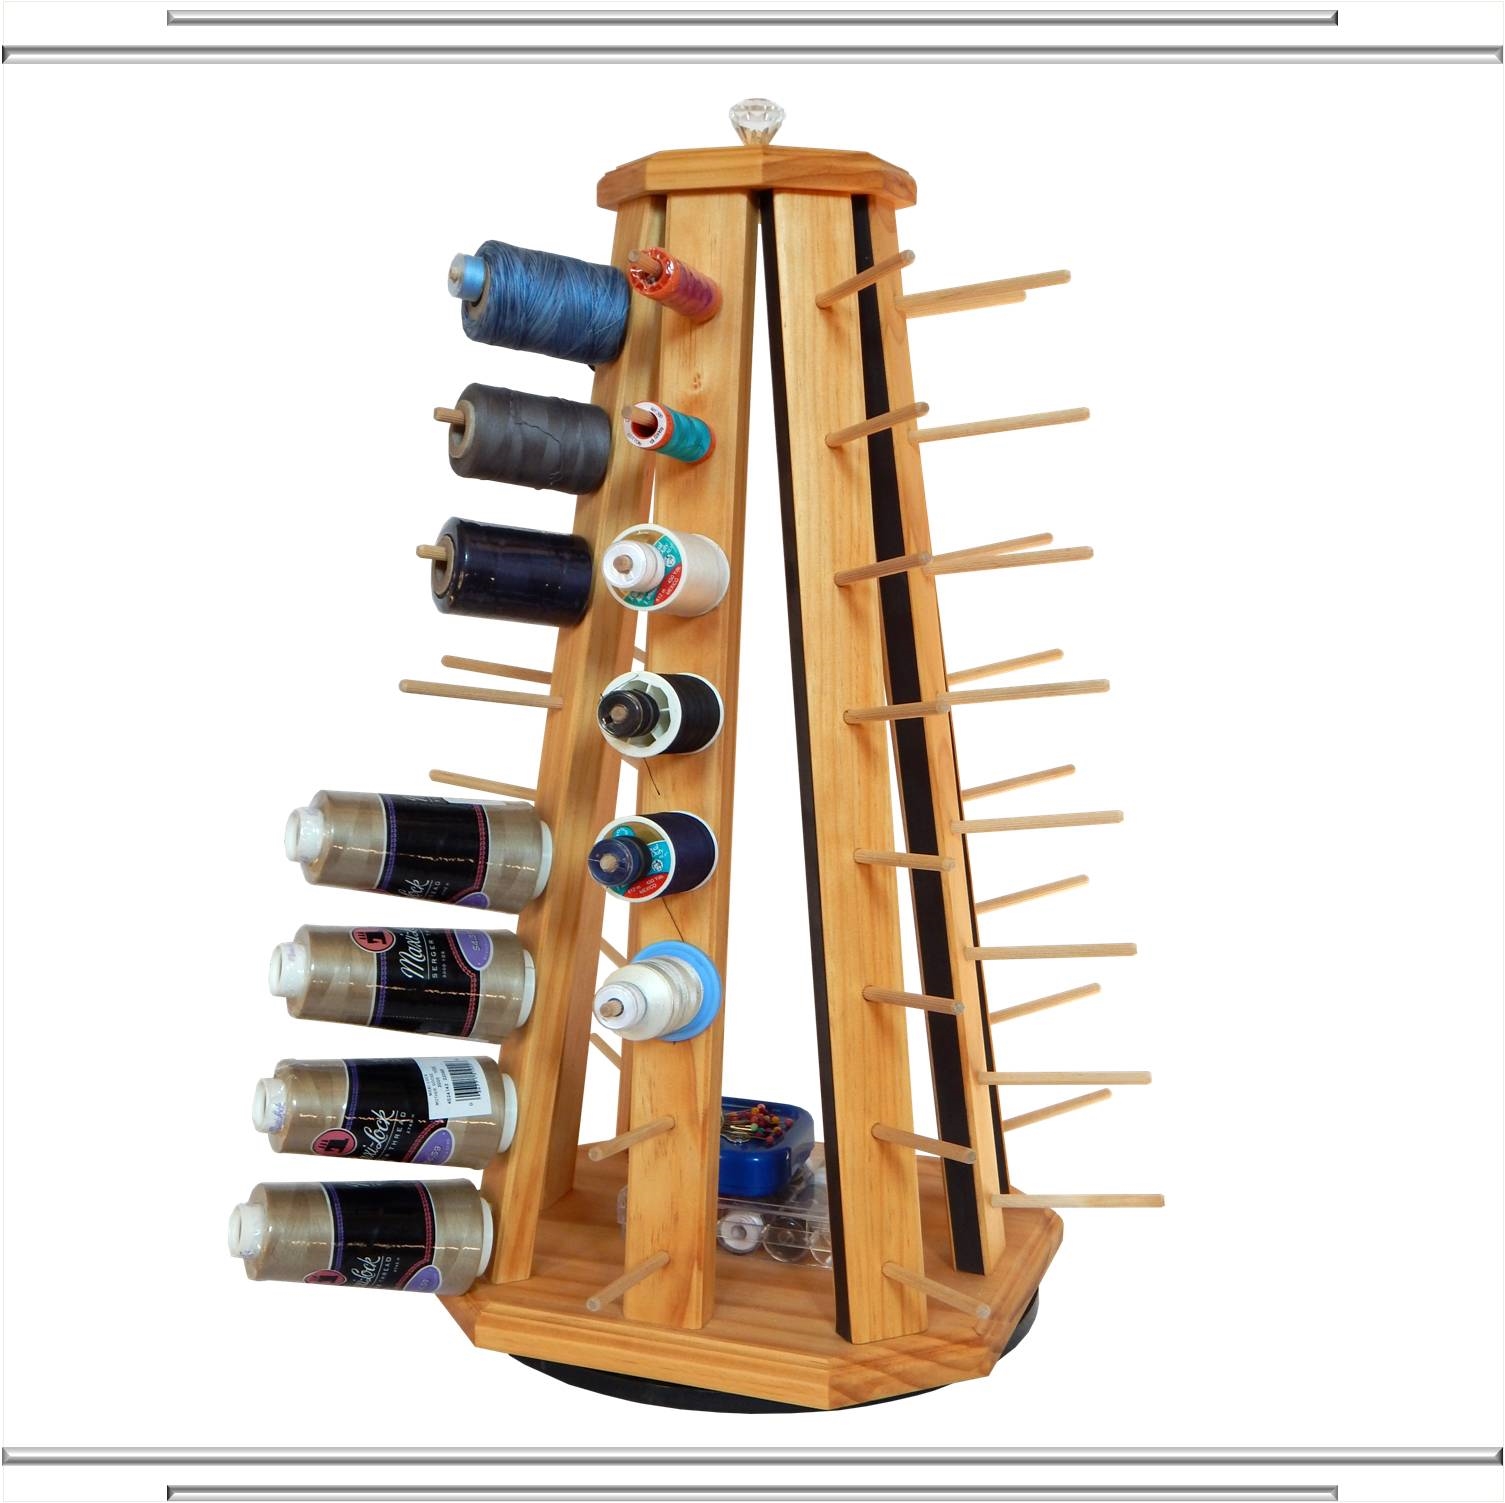 House Projects- Thread spool rack, Magazine rack and Paint bottle holder